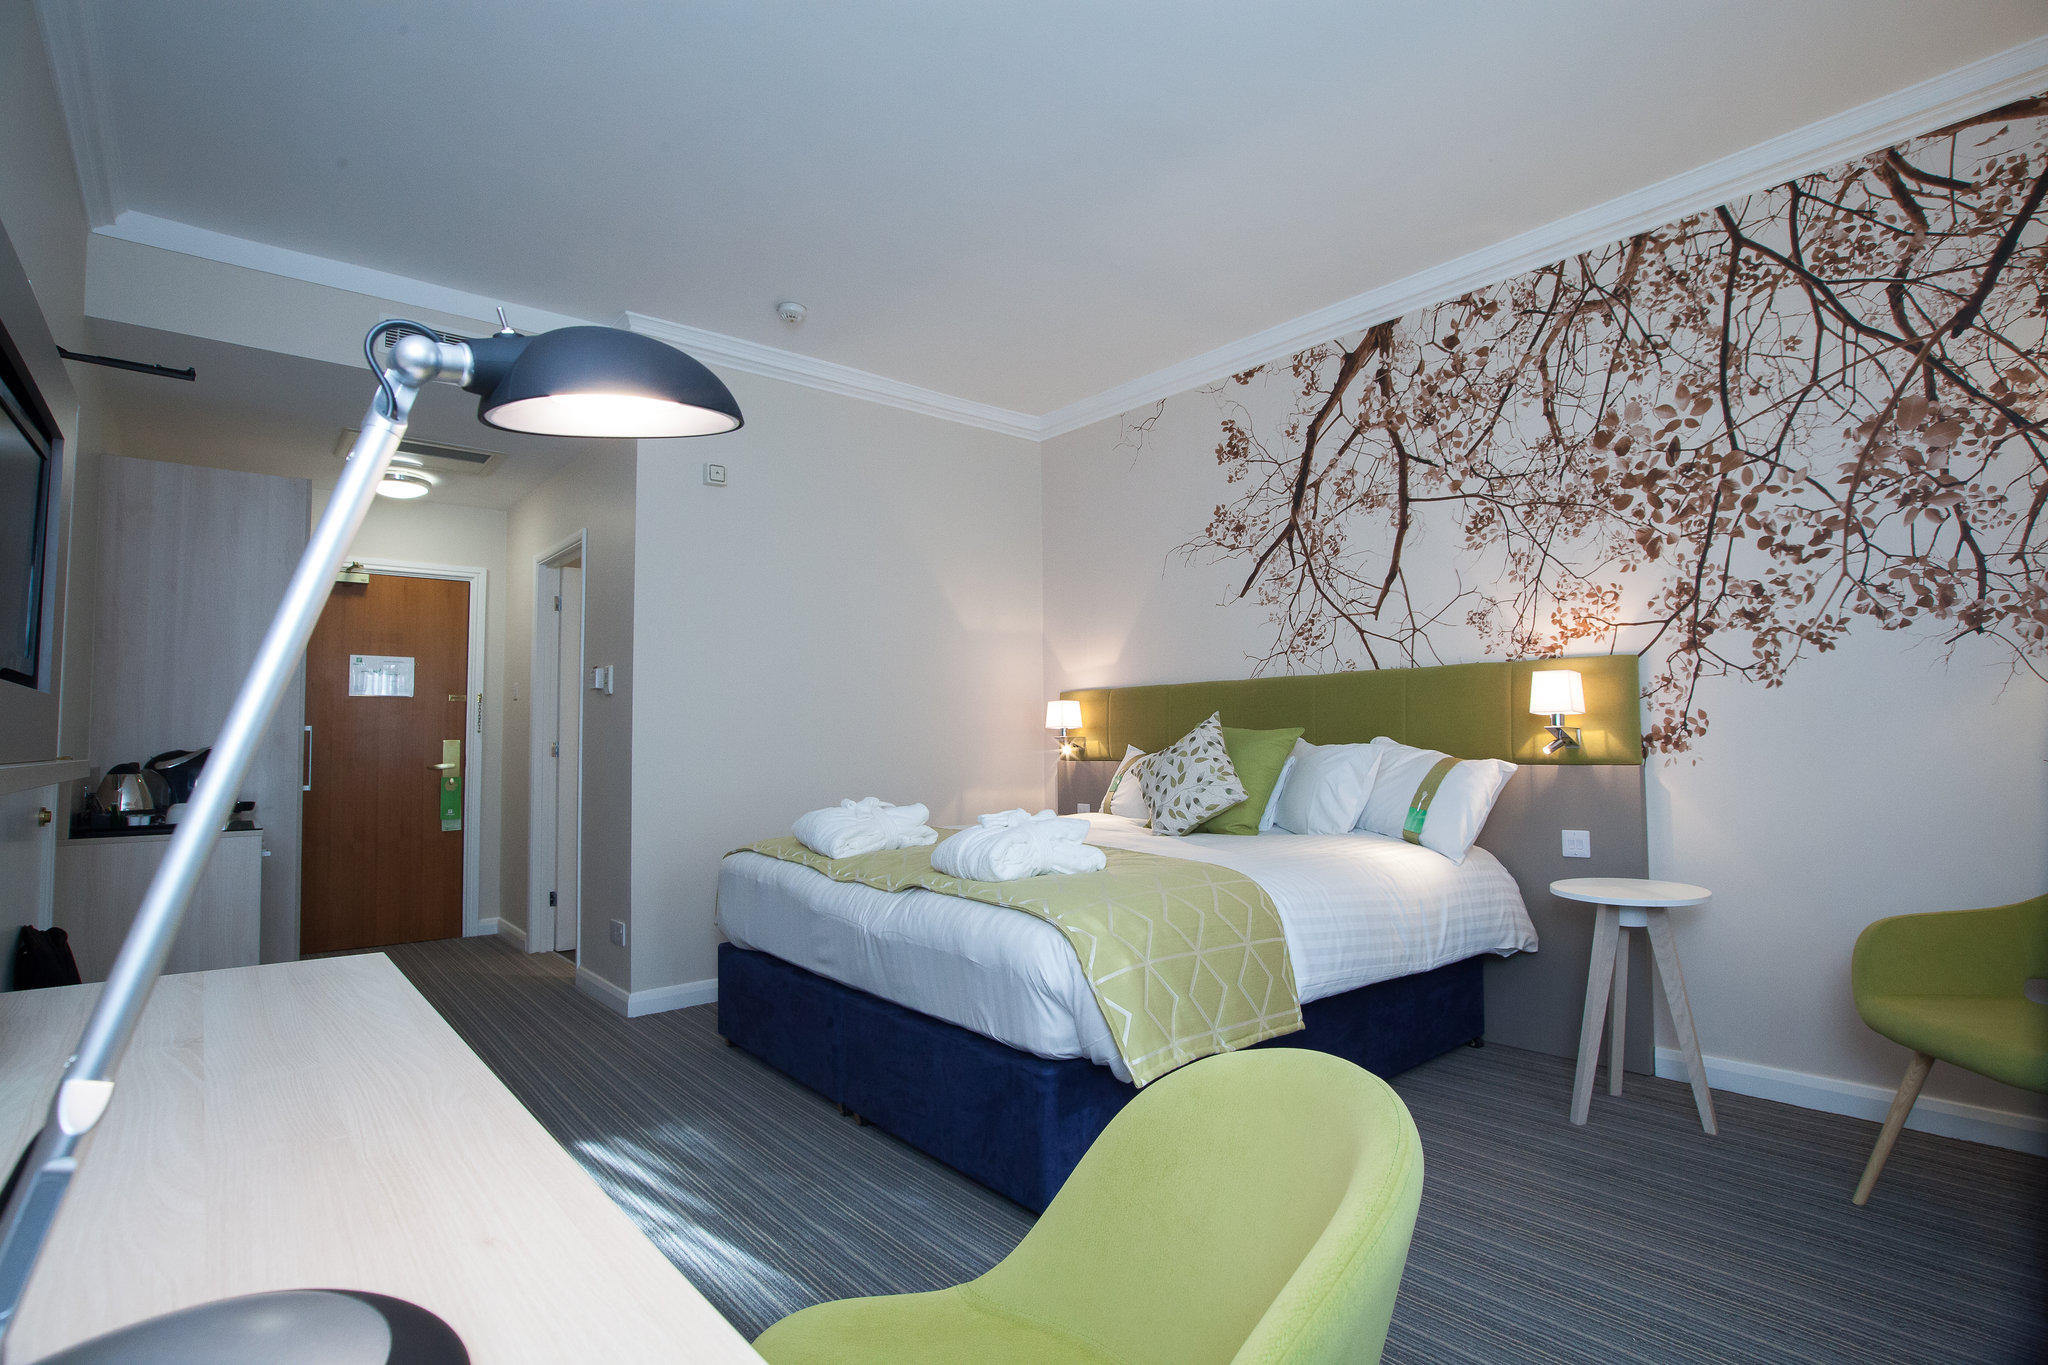 Holiday Inn Corby - Kettering A43, an IHG Hotel Corby 01536 401020